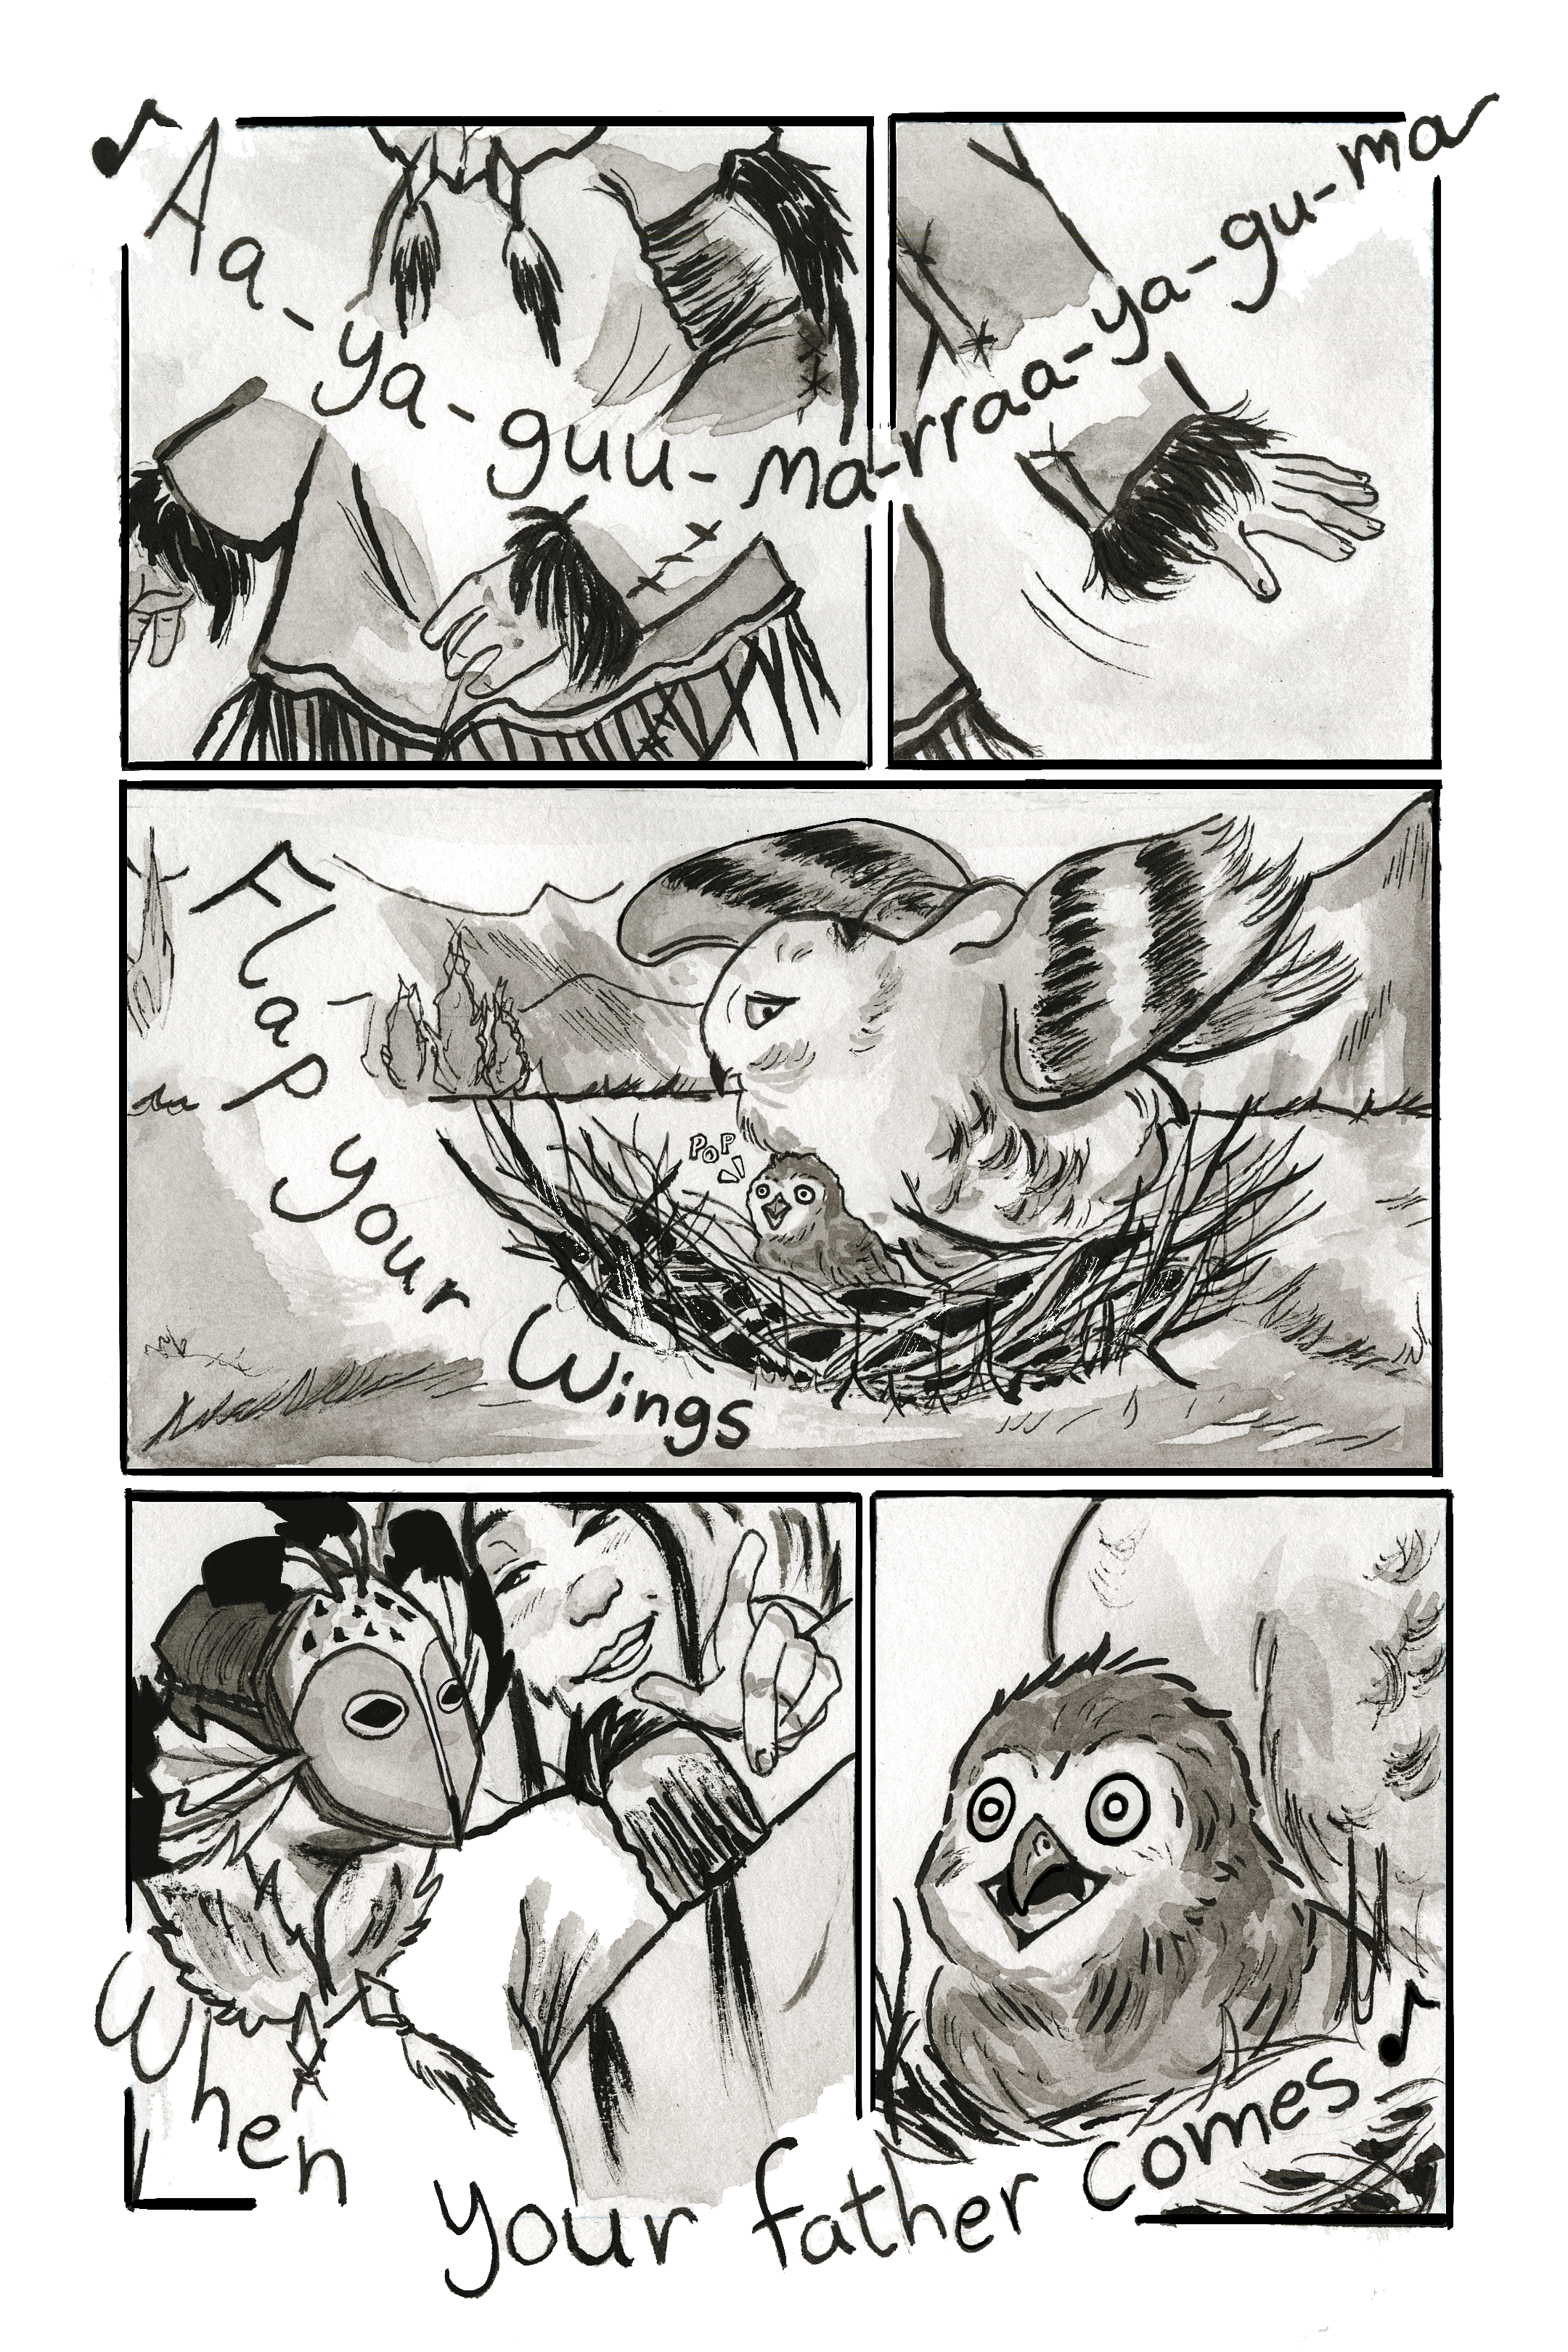 3rd-page-of-wings-edited--madeline-zuluaga.png